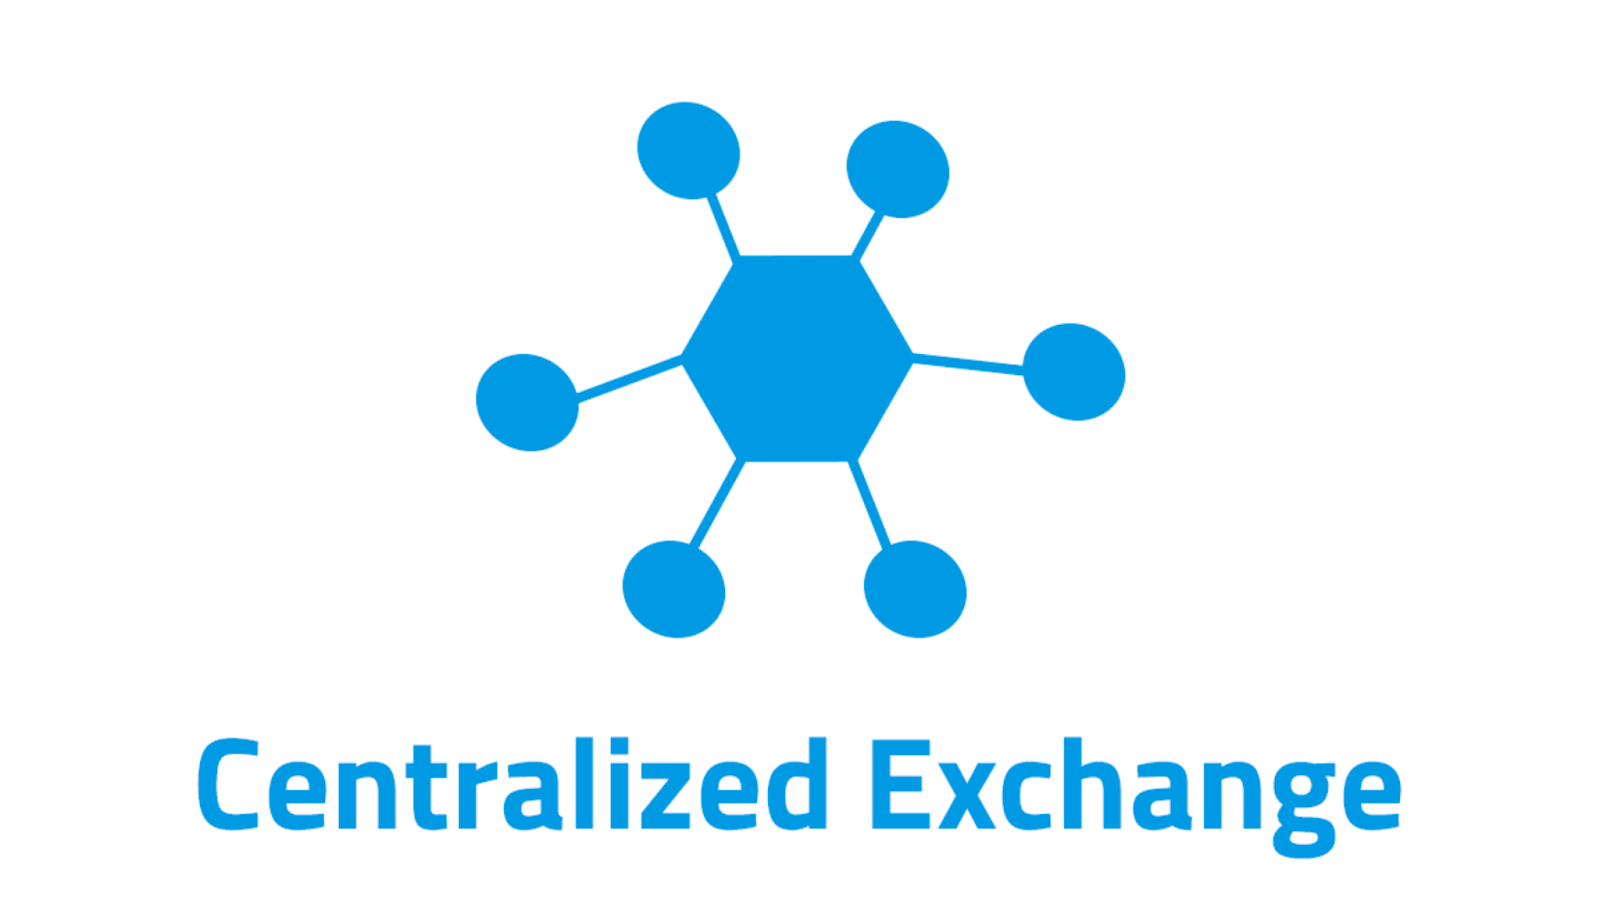 What is Centralized Exchange (CEX)?